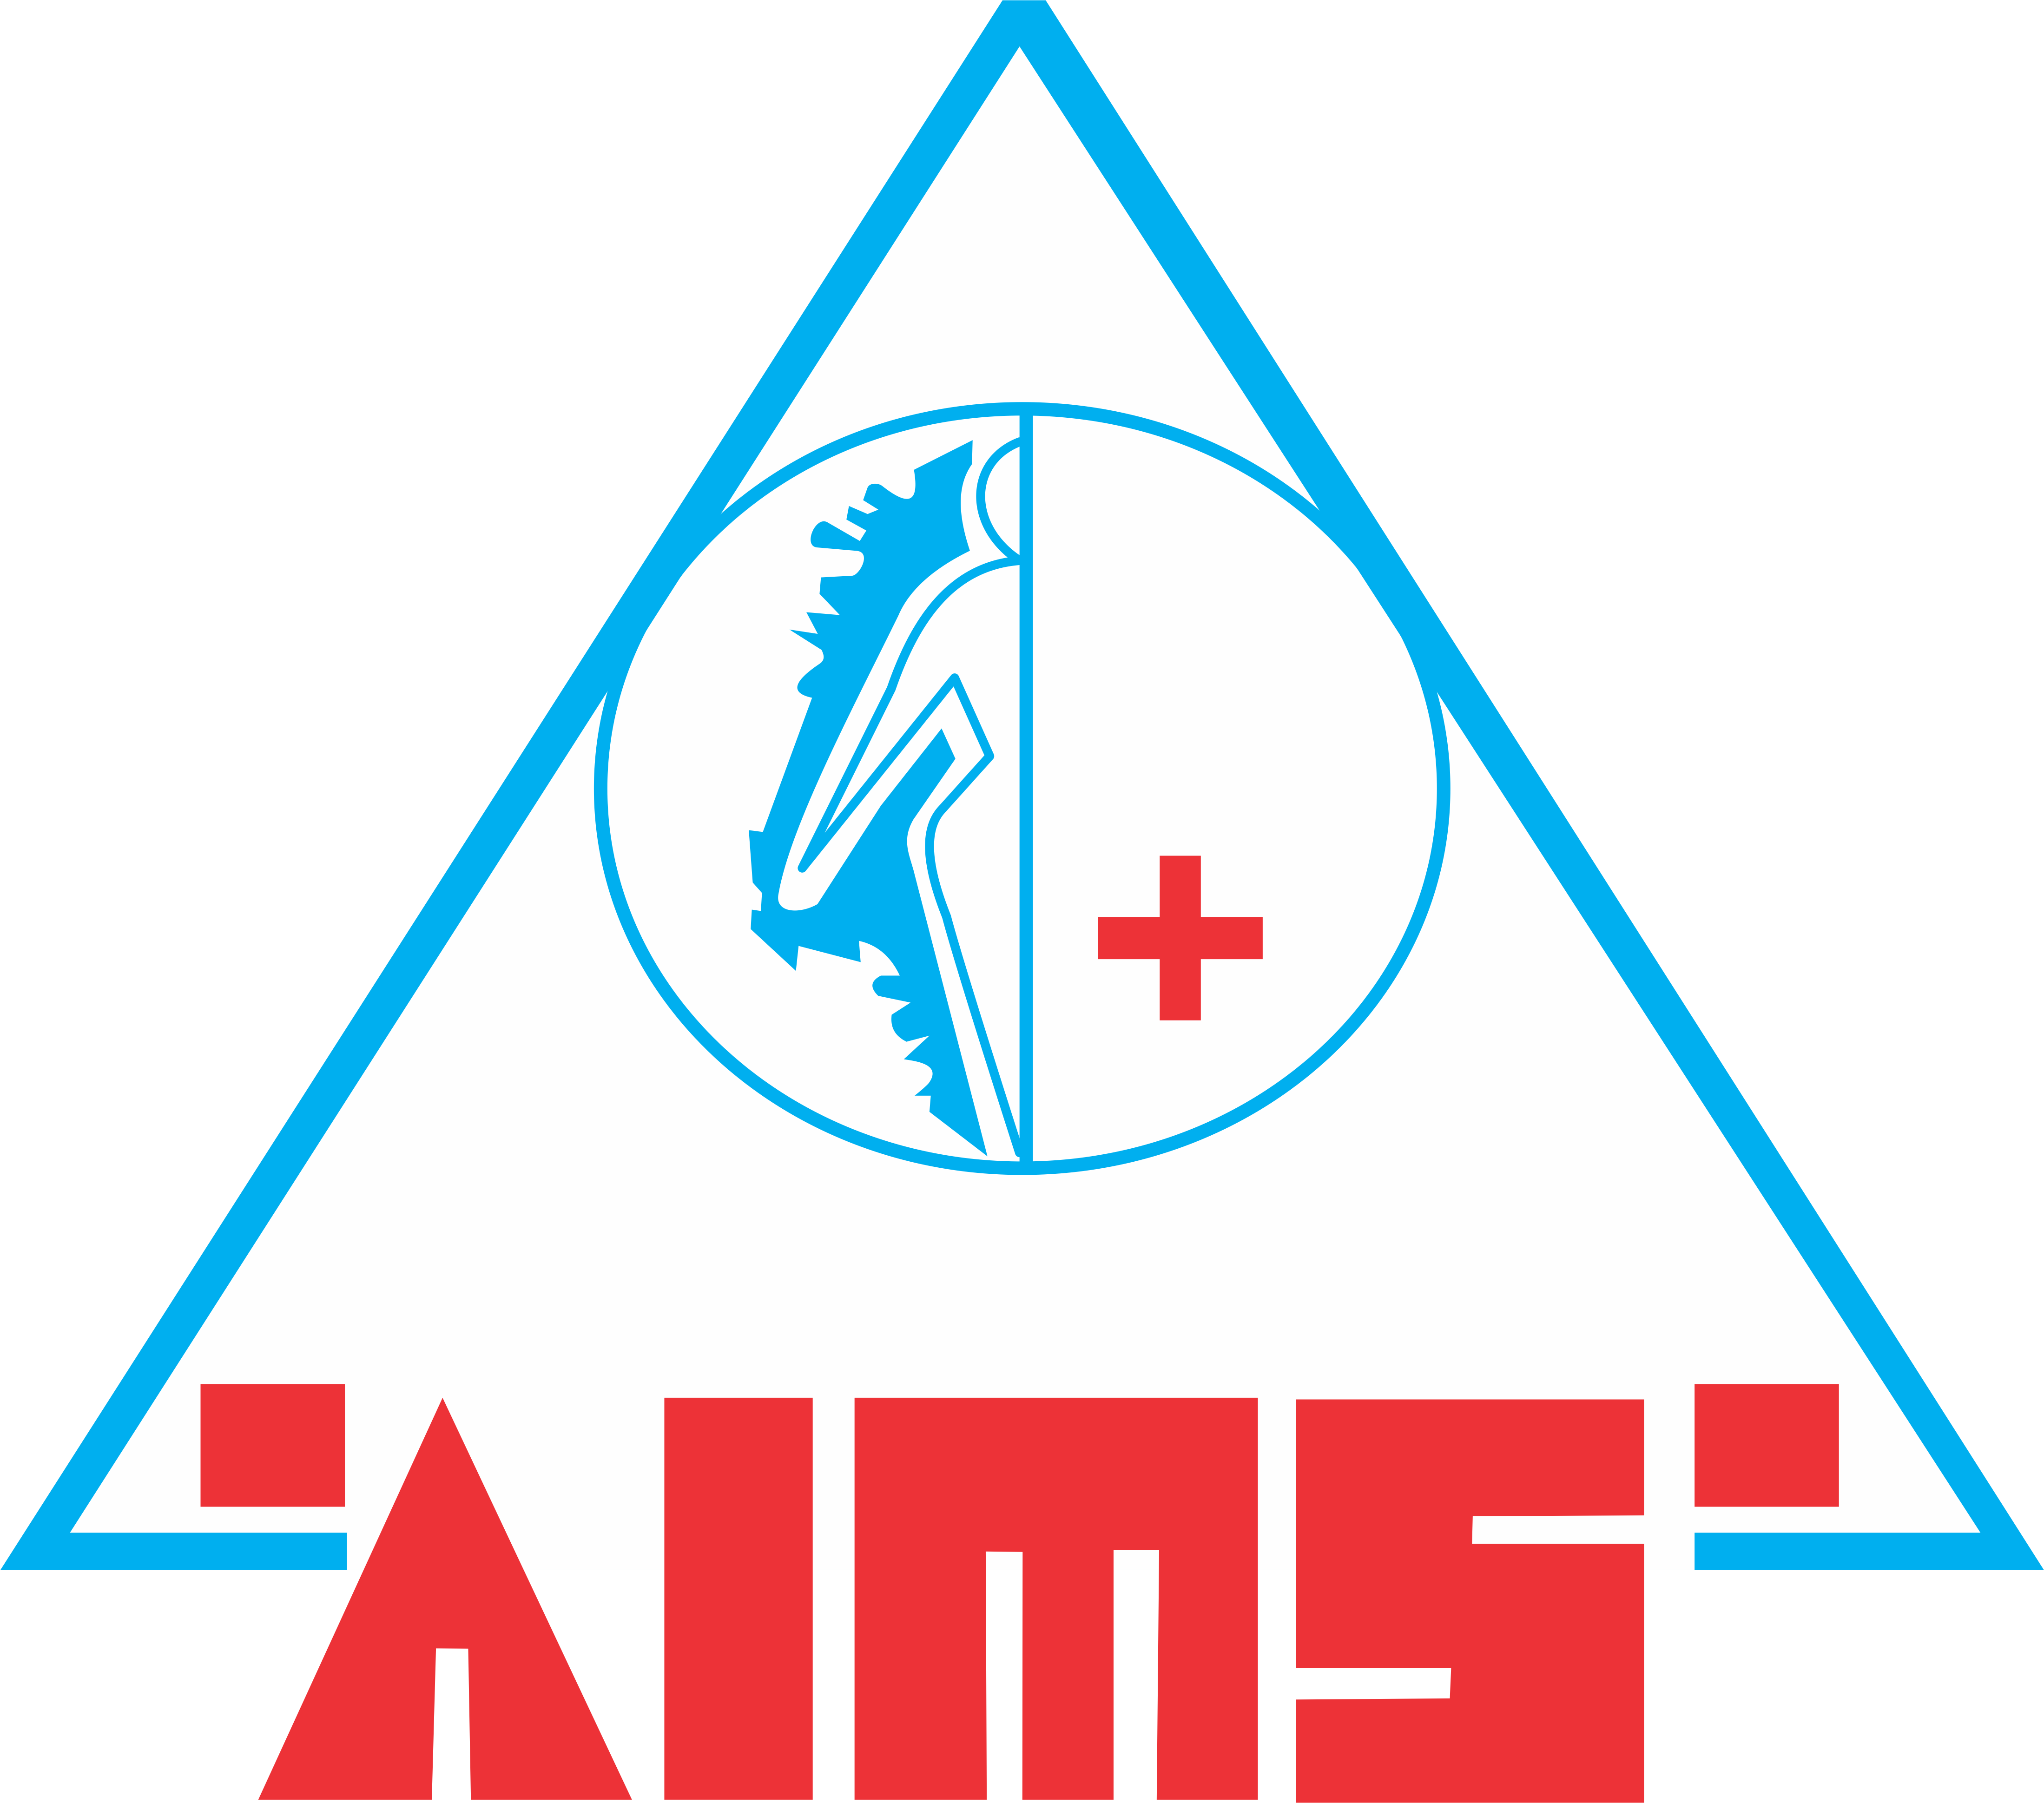 Anant Multispeciality Hospital|Dentists|Medical Services